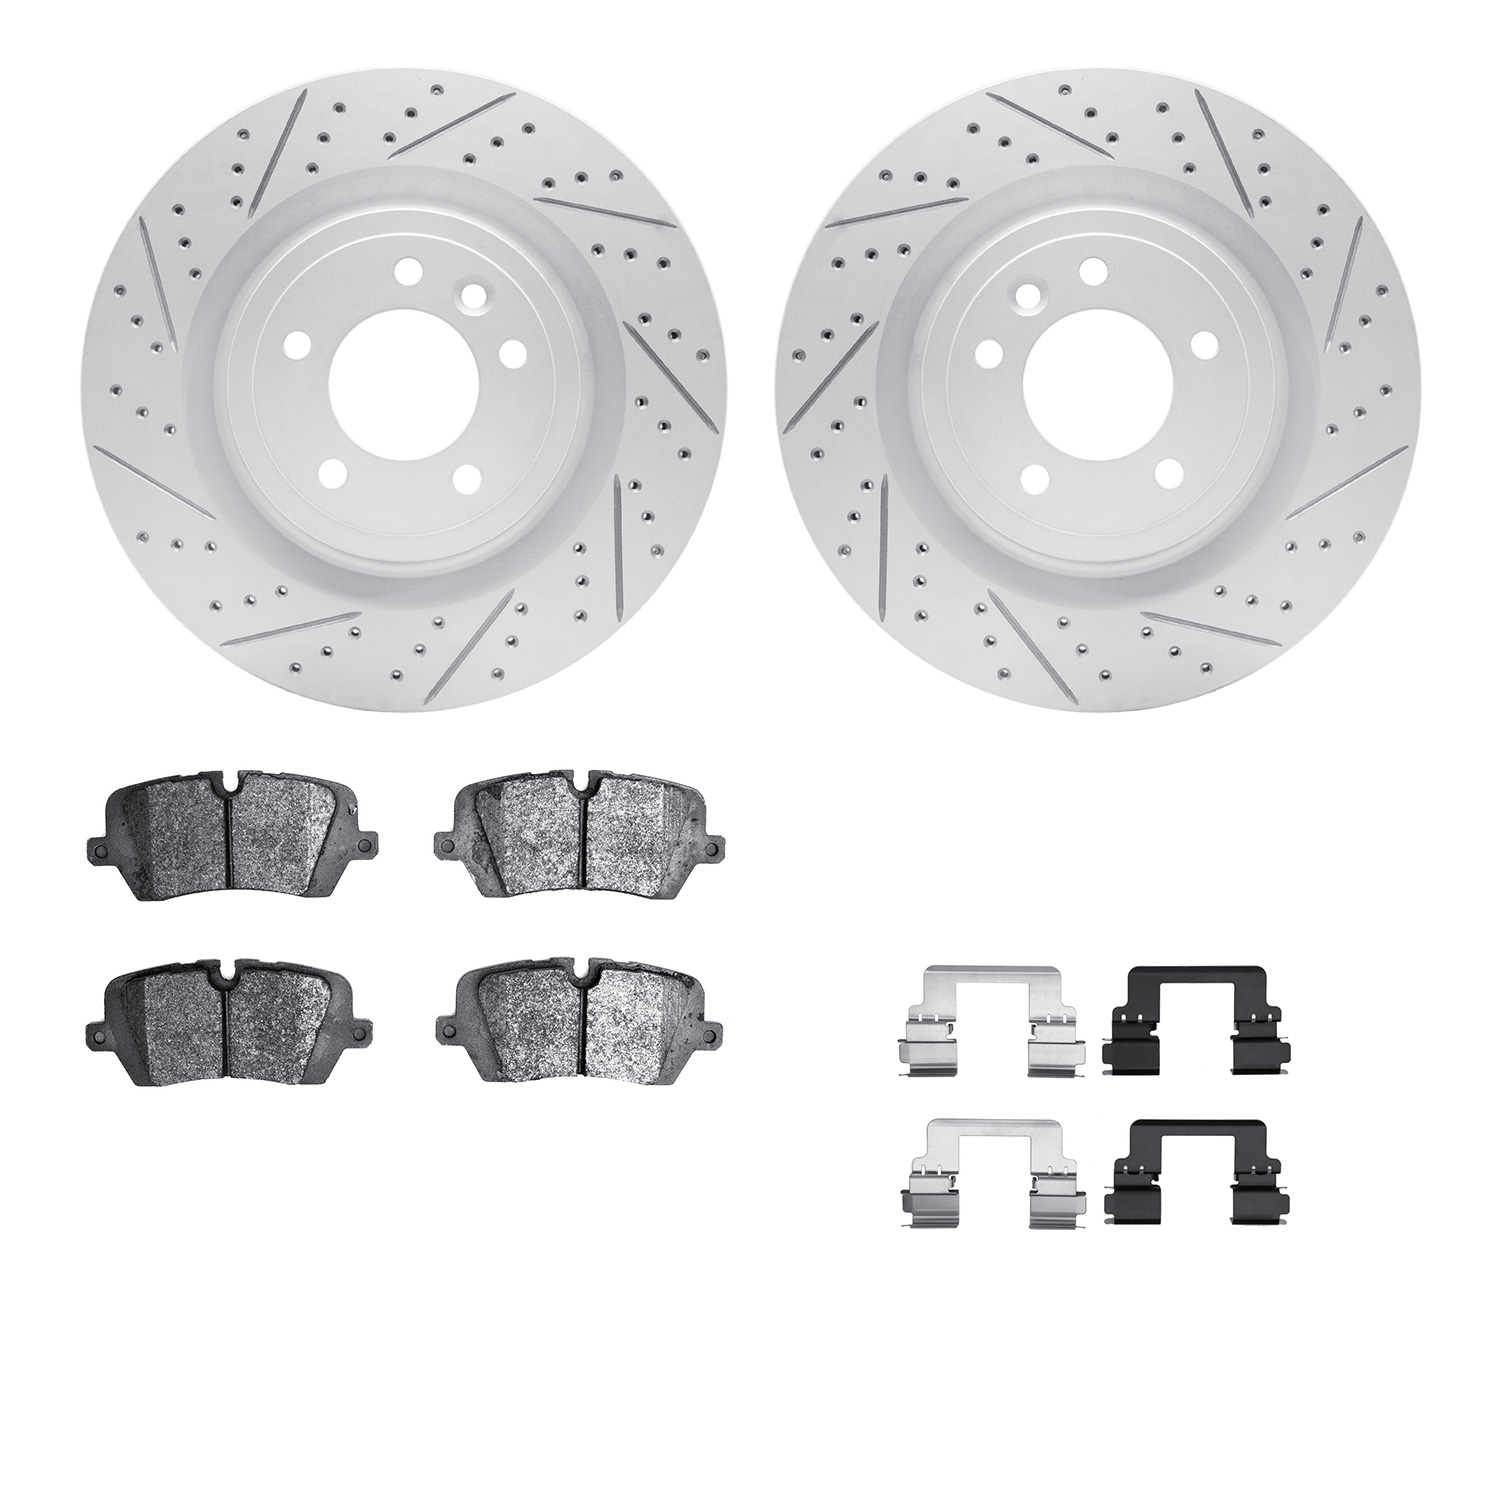 2512-11028 Geoperformance Drilled/Slotted Rotors w/5000 Advanced Brake Pads Kit & Hardware, 2014-2017 Land Rover, Position: Rear